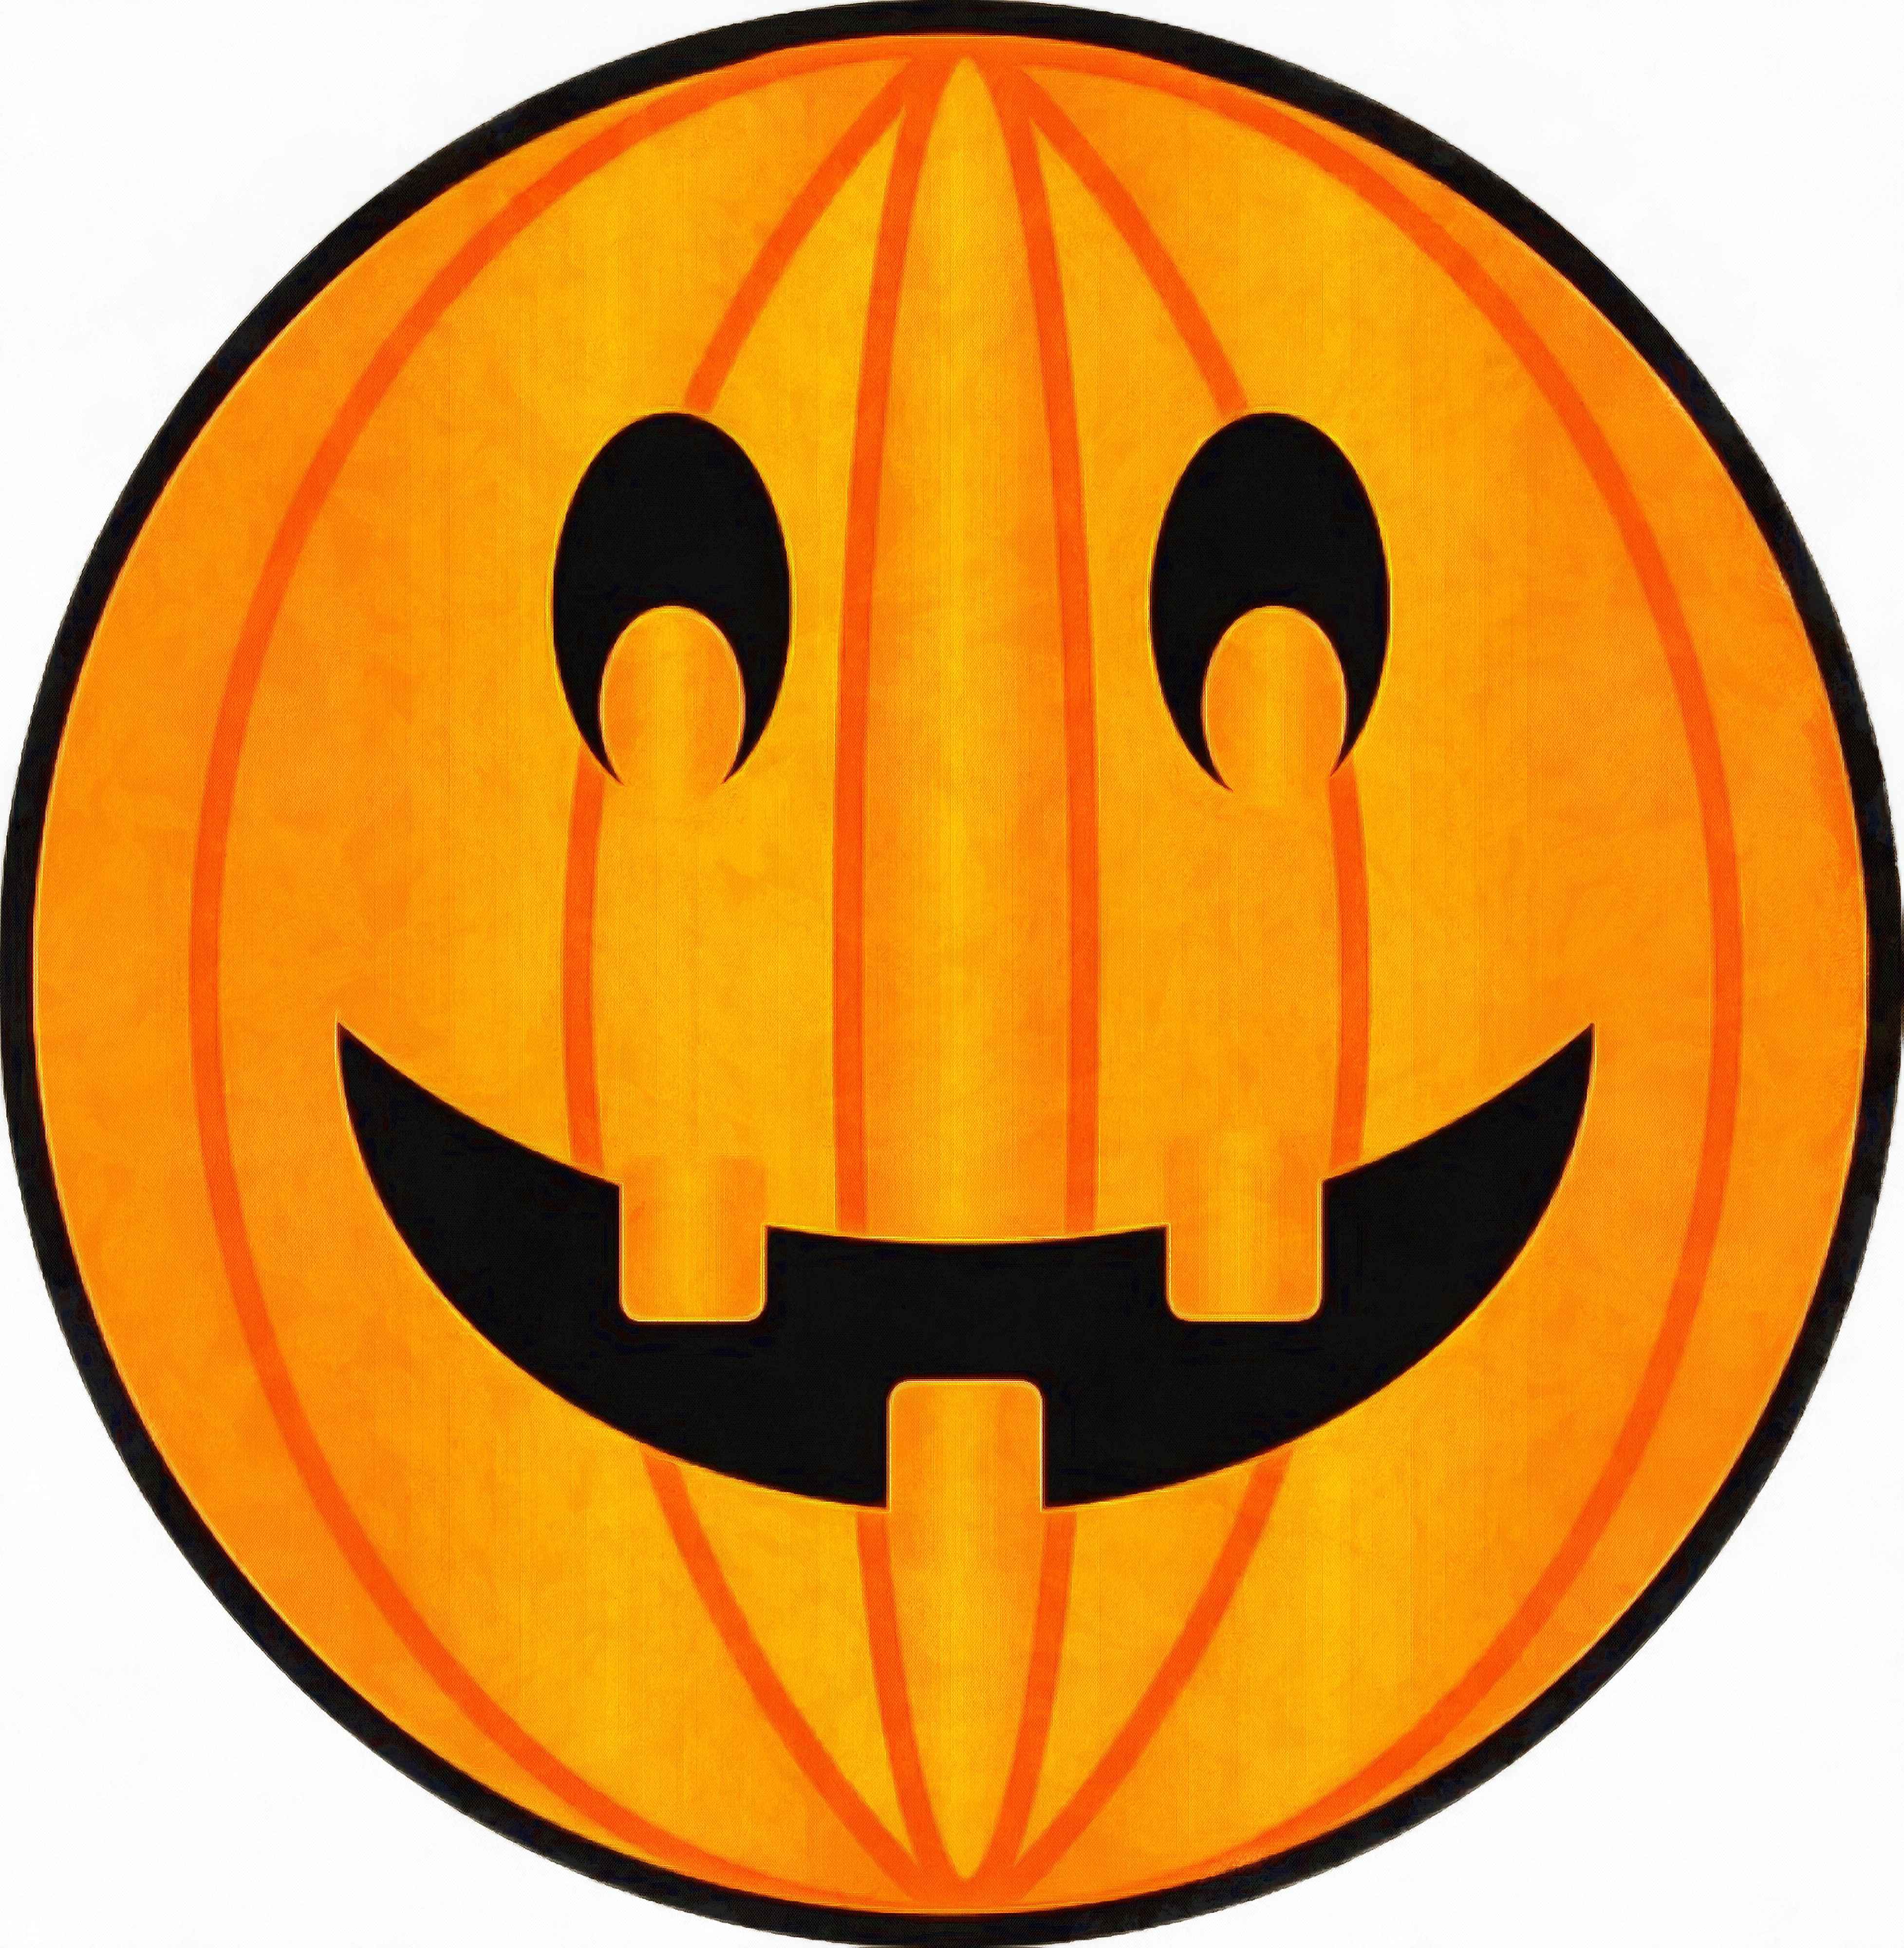 pumpkin, holiday, celebration, fun, carnival, smile, face, Halloween, All Saints' Day - halloween, free image, free picture, stock free images, public domain images, download free photos, free stock photos, free graphic 